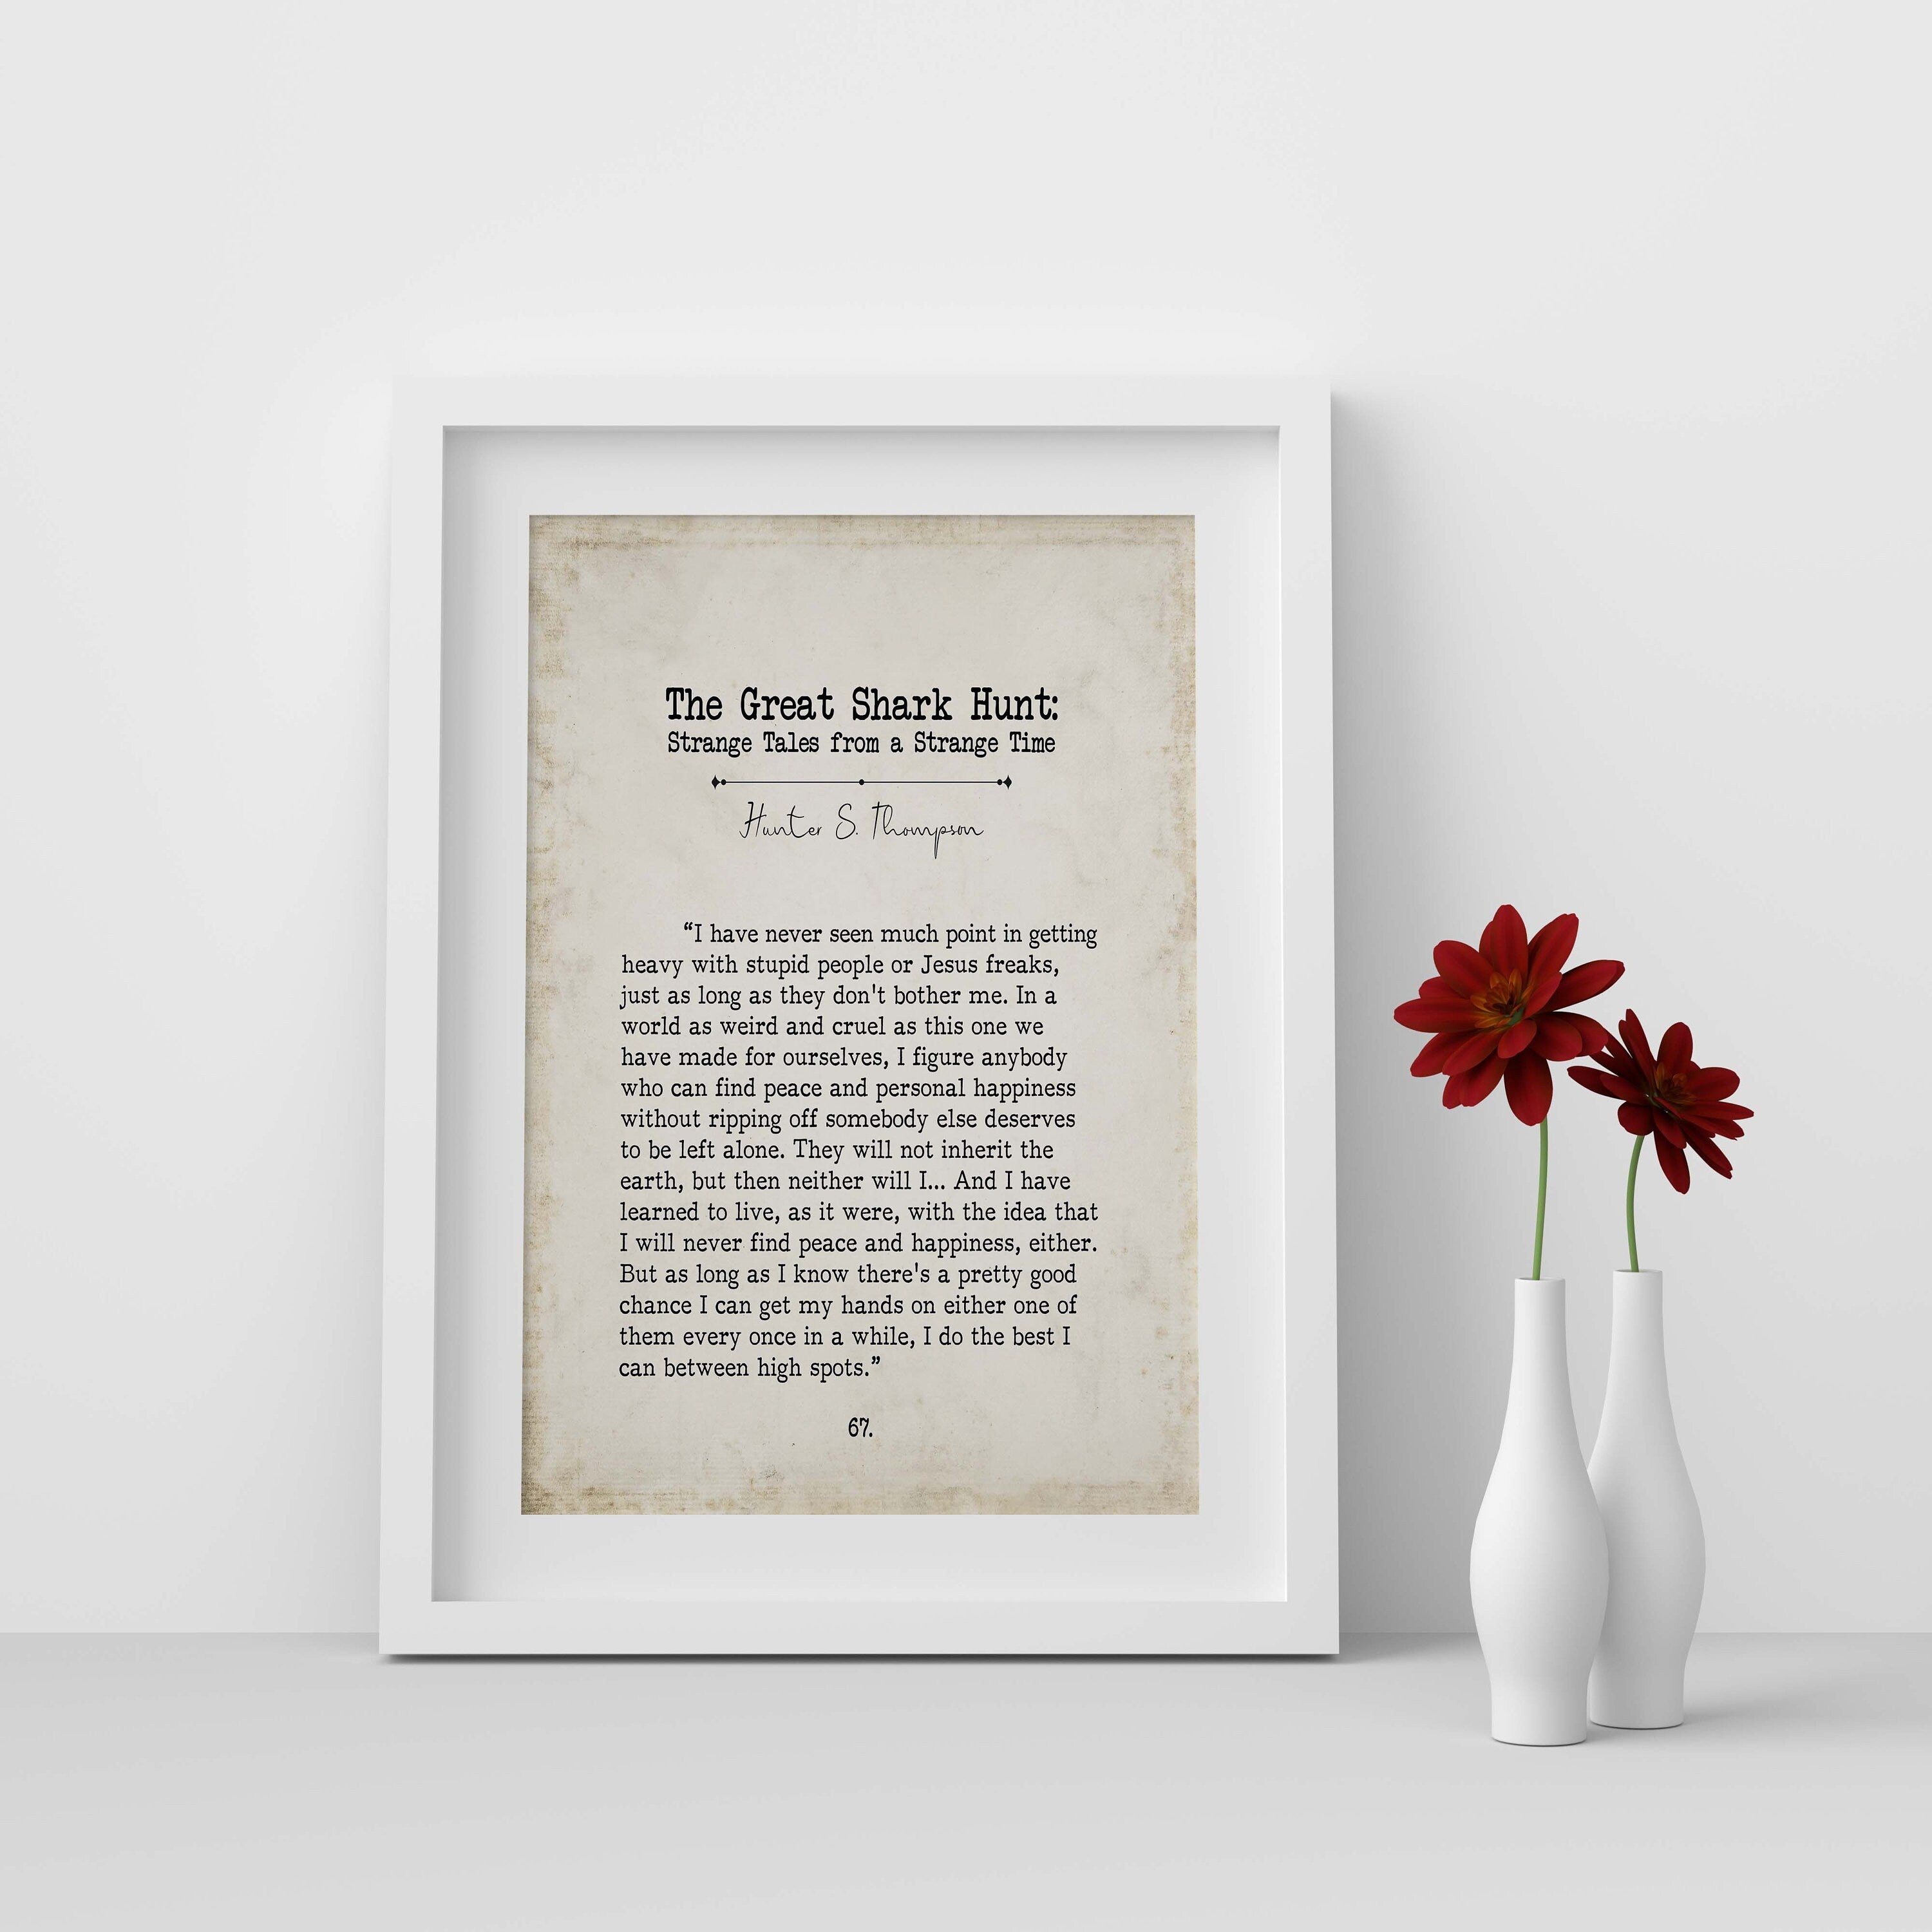 Hunter S Thompson Book Page Inspirational Wall Art, The Great Shark Hunt Quote Vintage Style Print Wall Decor